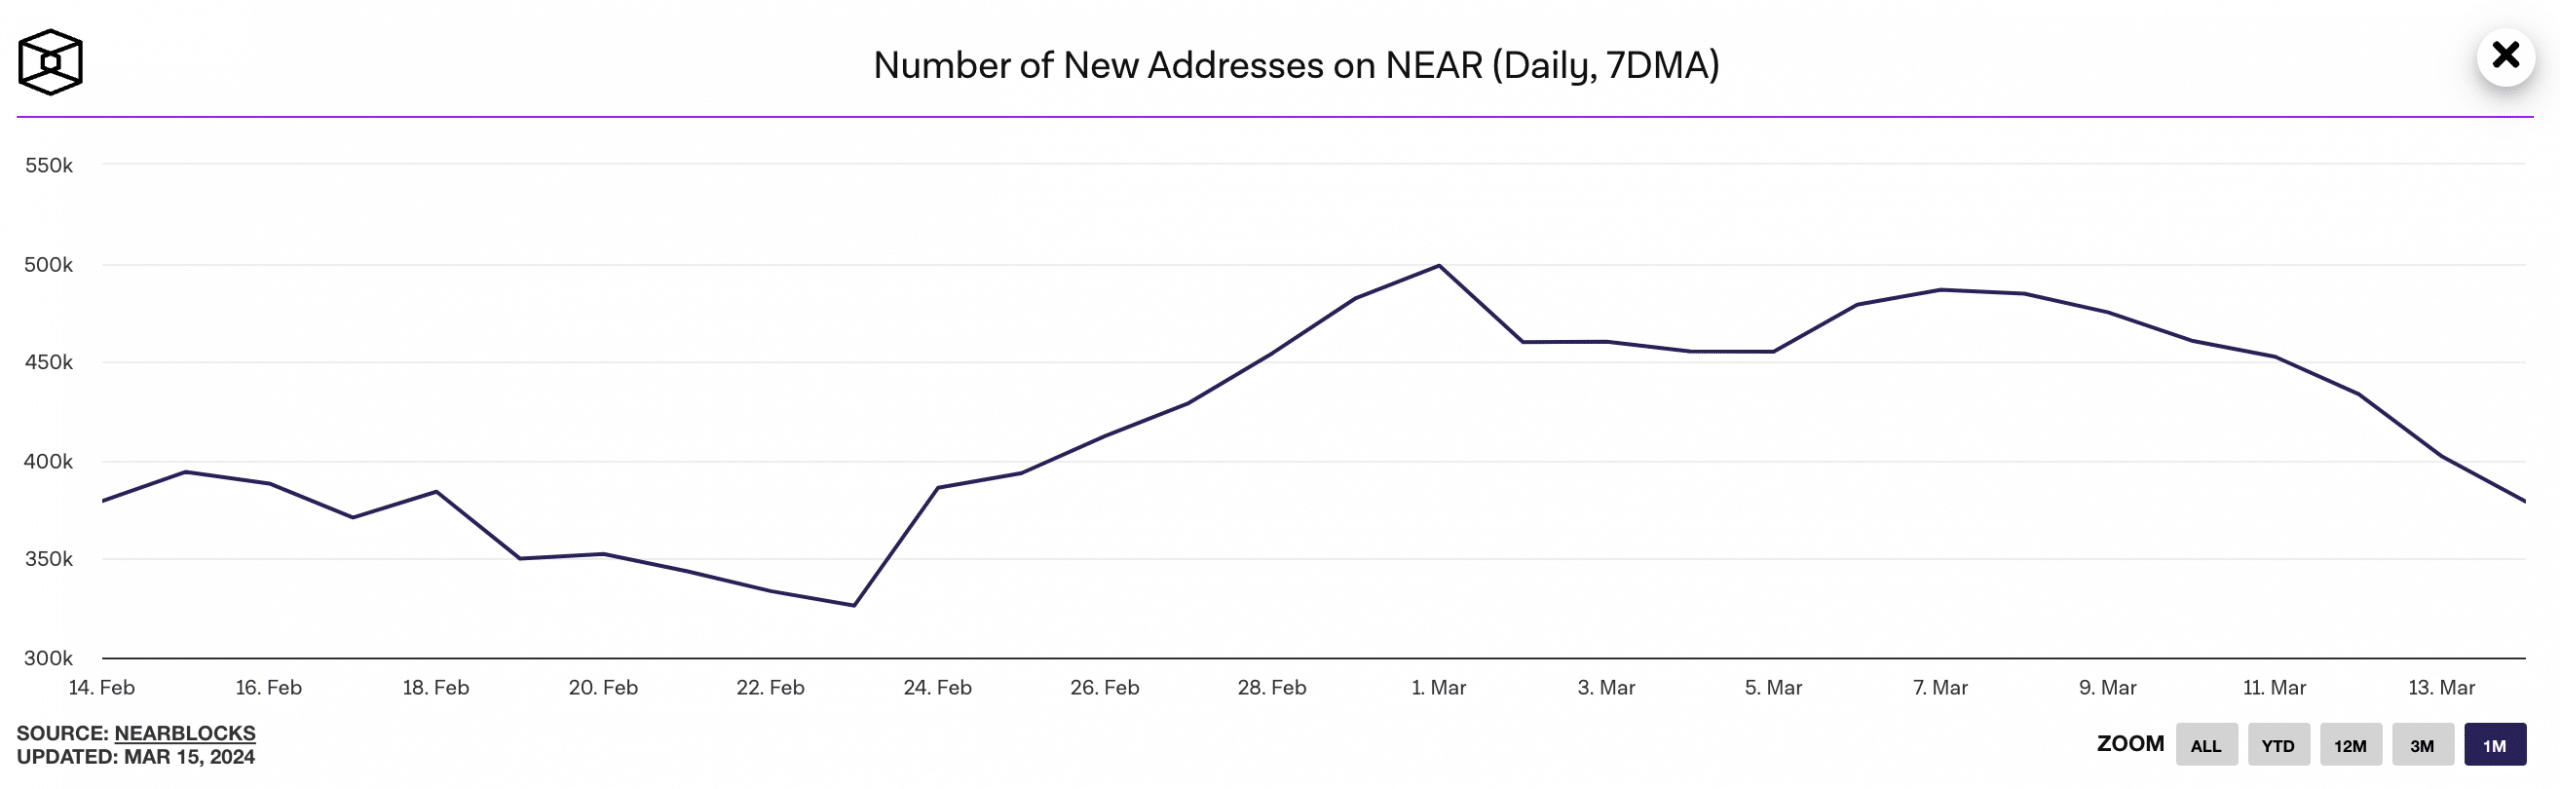 NEAR Number of New Addresses